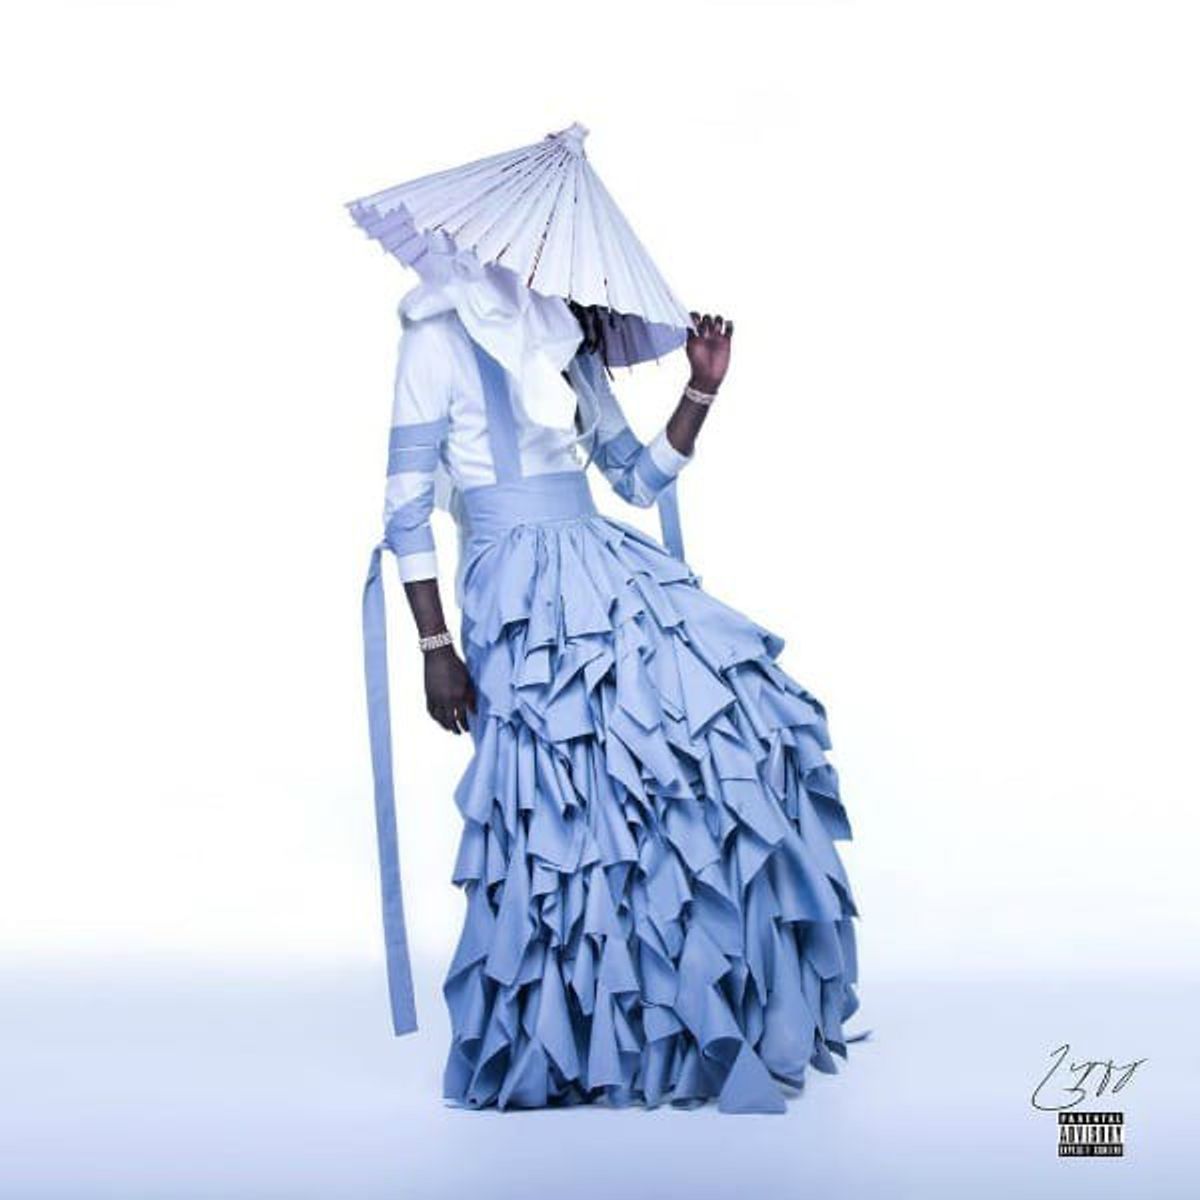 'JEFFERY' by Young Thug